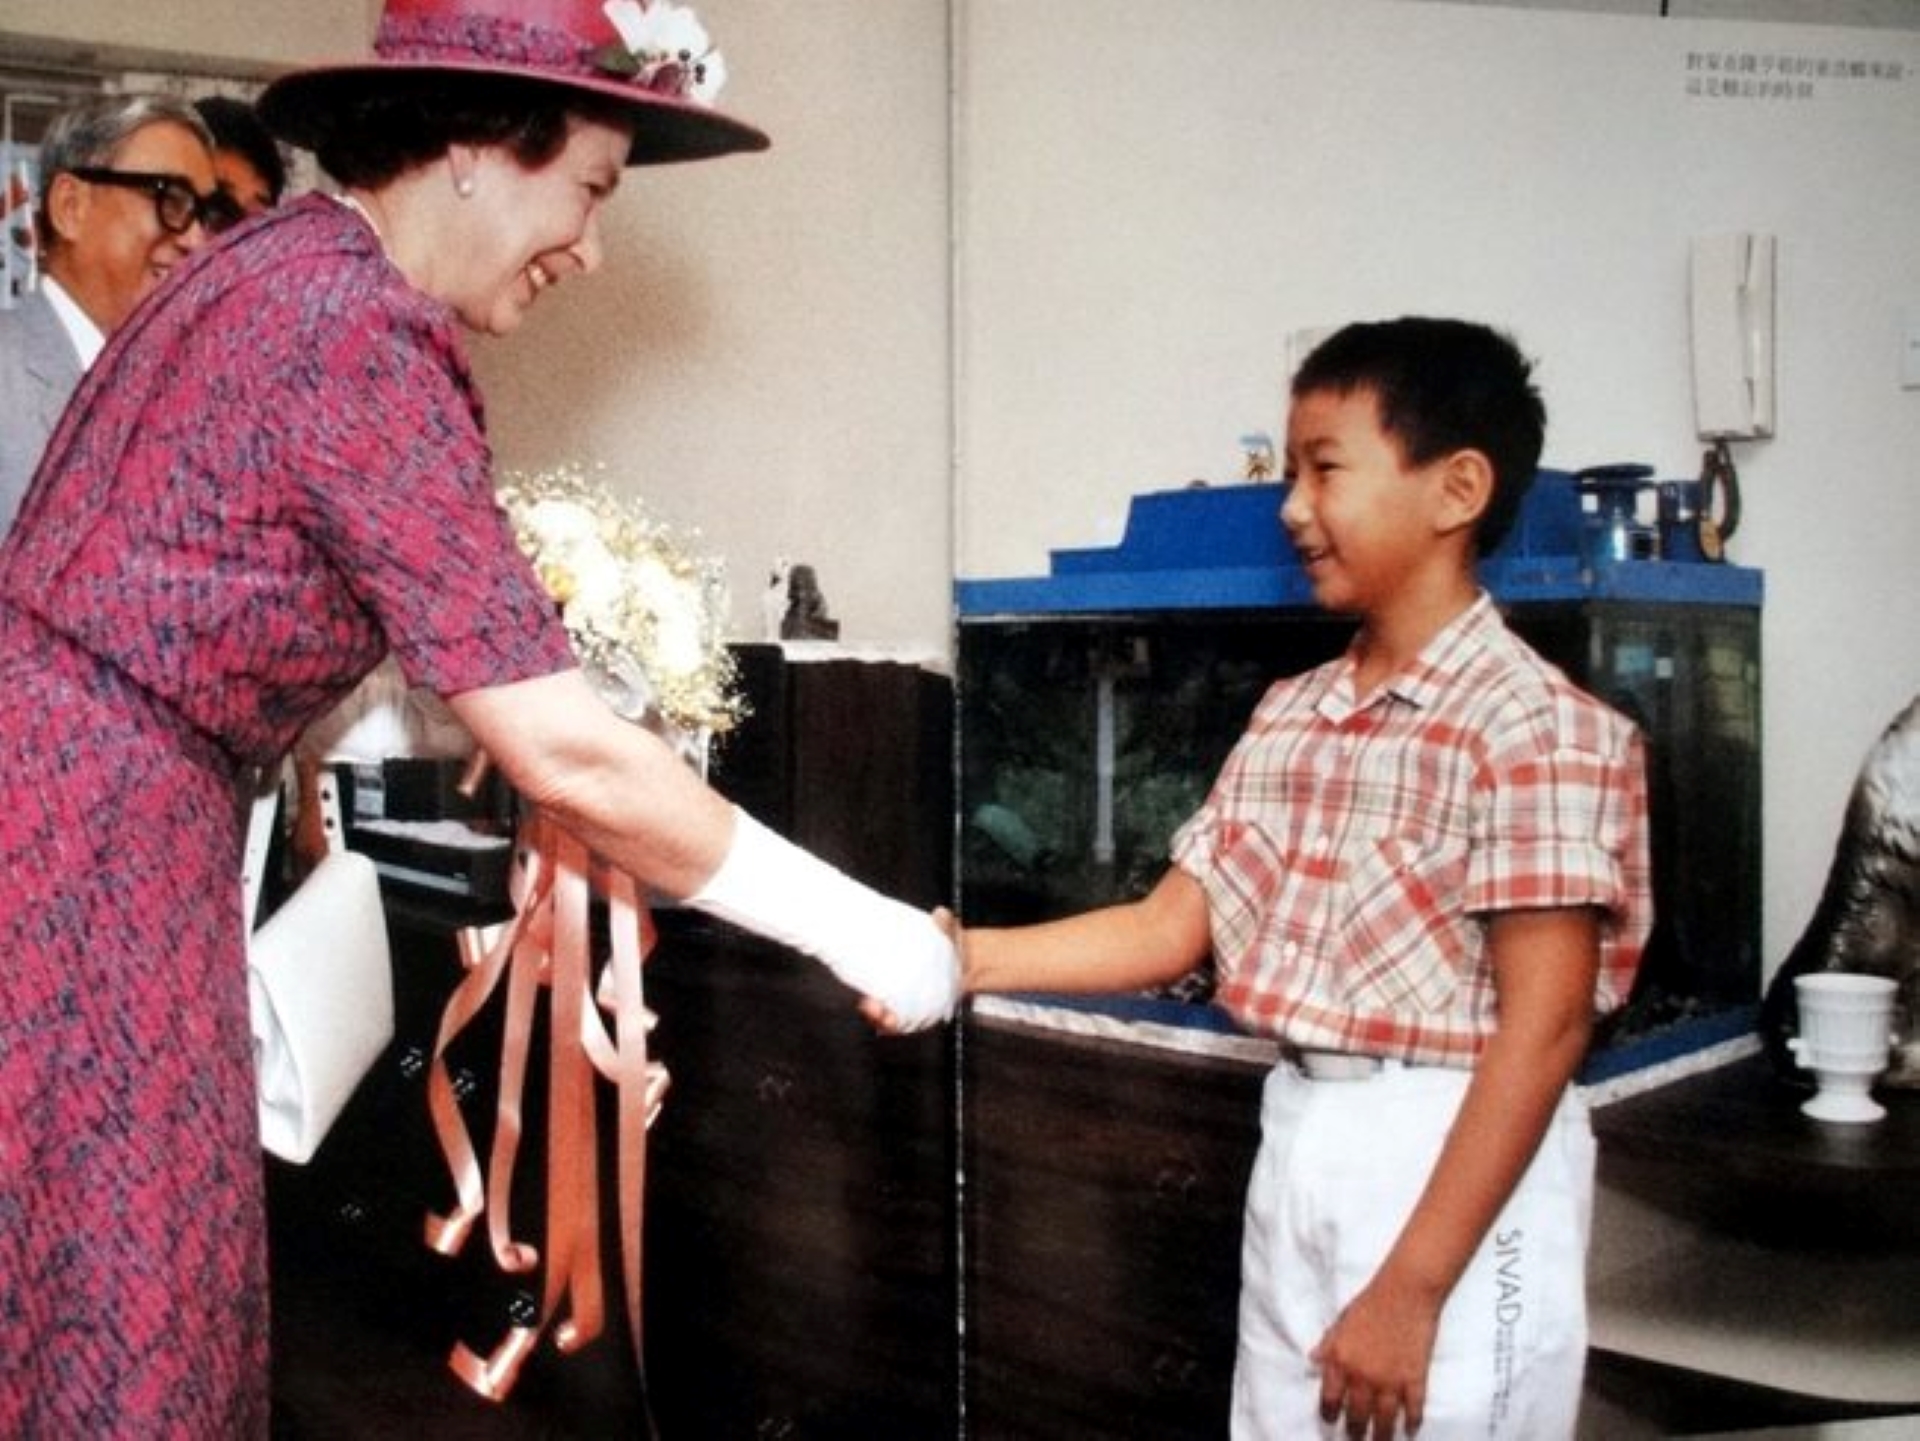 Queen Elizabeth II visiting a Hong Kong family during her visit to the city in 1986. The Queen is on the left, and shaking the hand of a little boy.